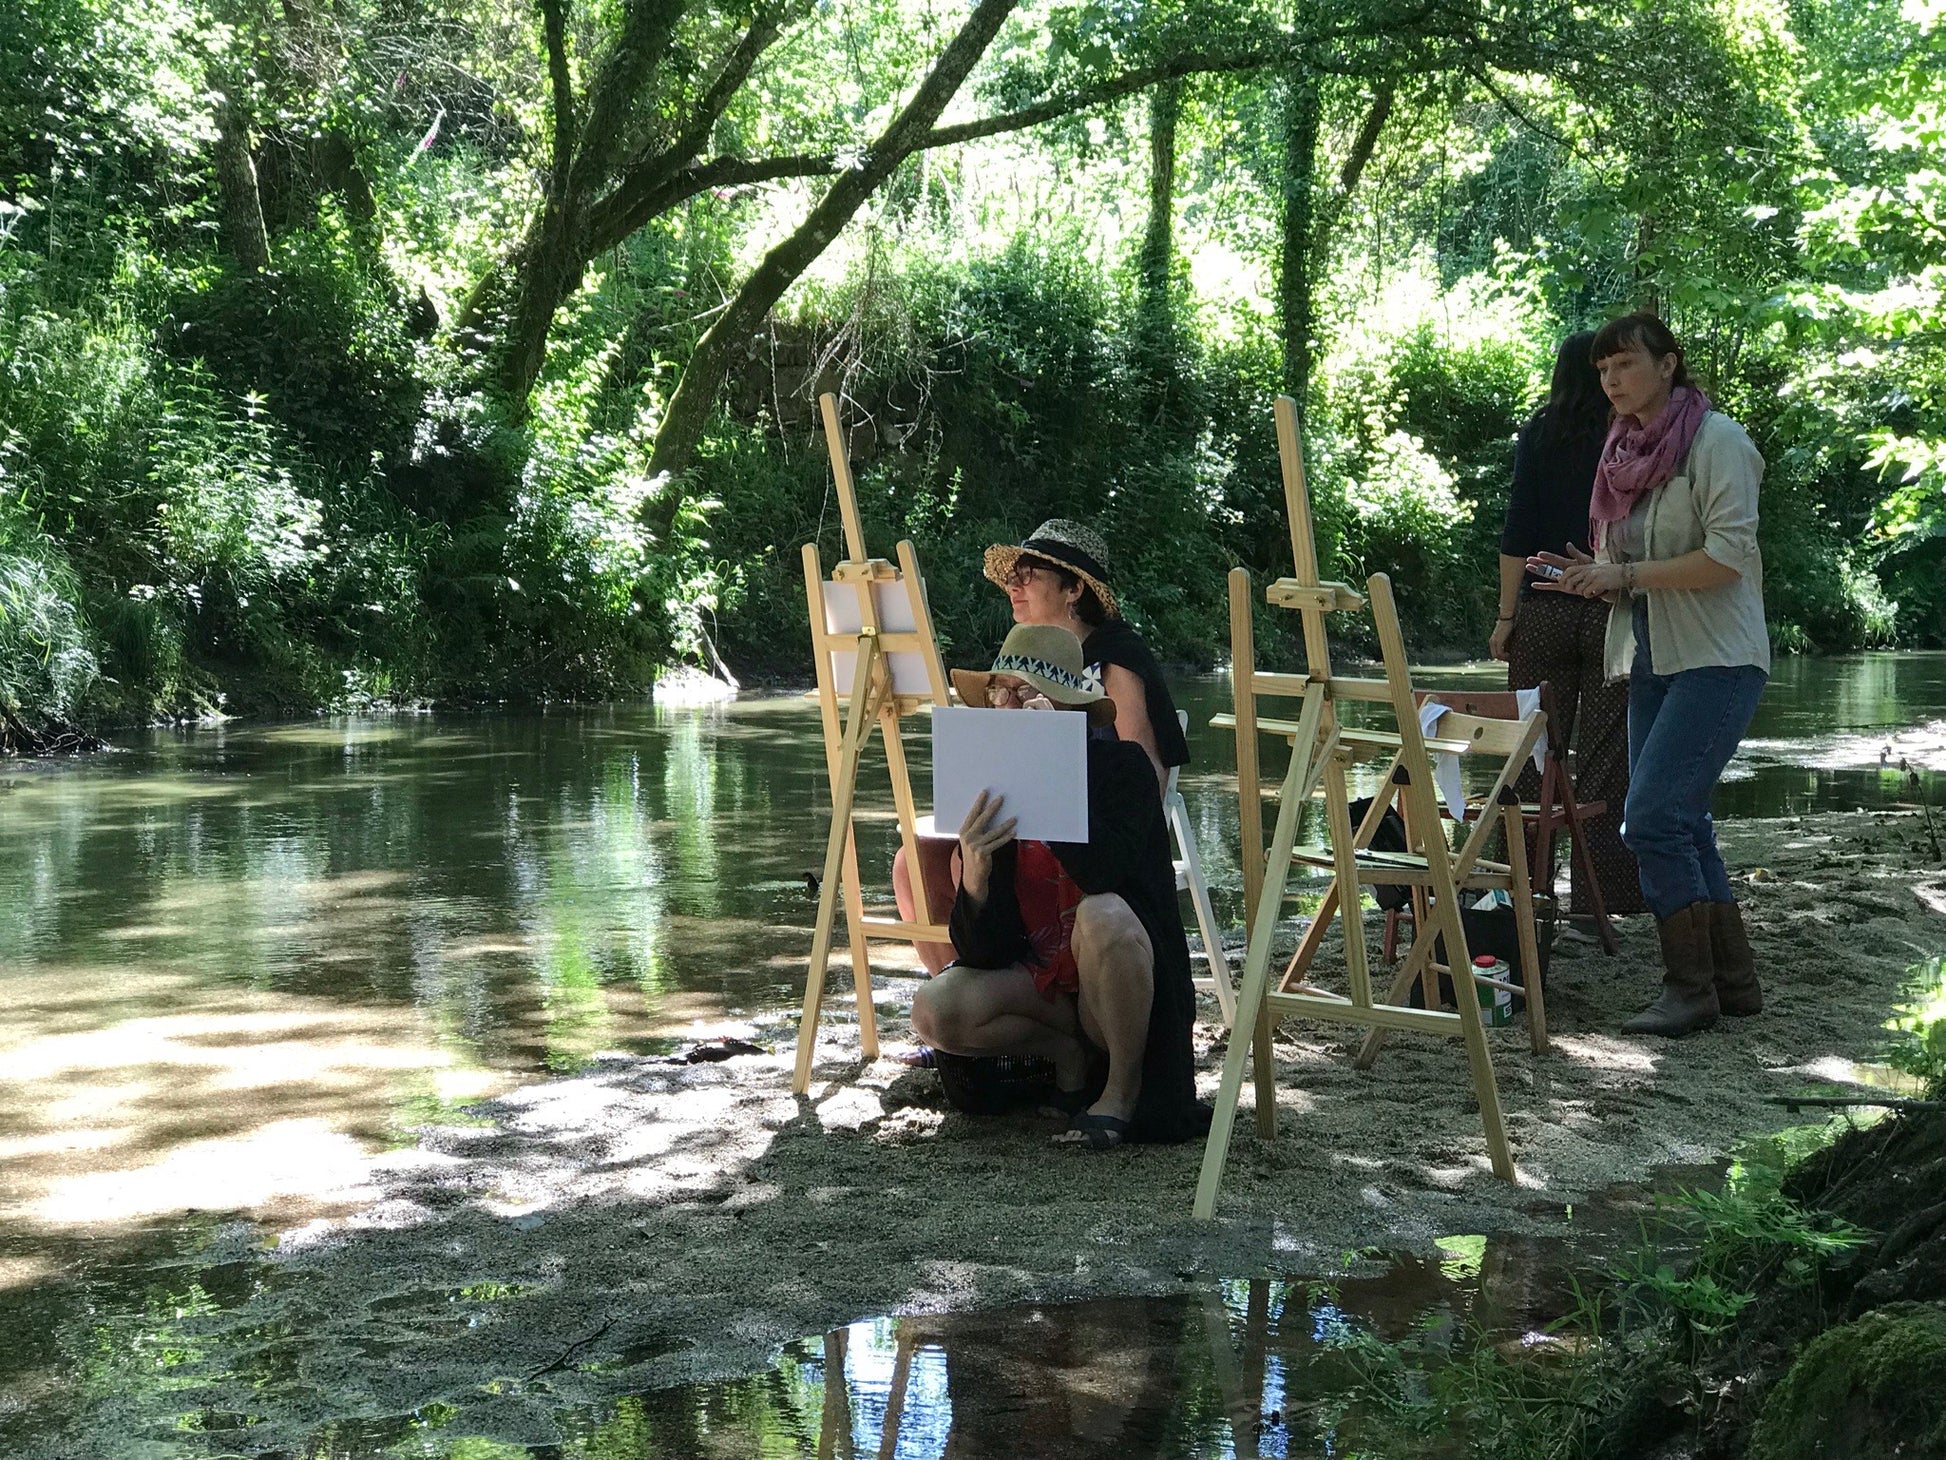 Oil Painting Workshop with Zuzanna in Amarante, Portugal by subcultours